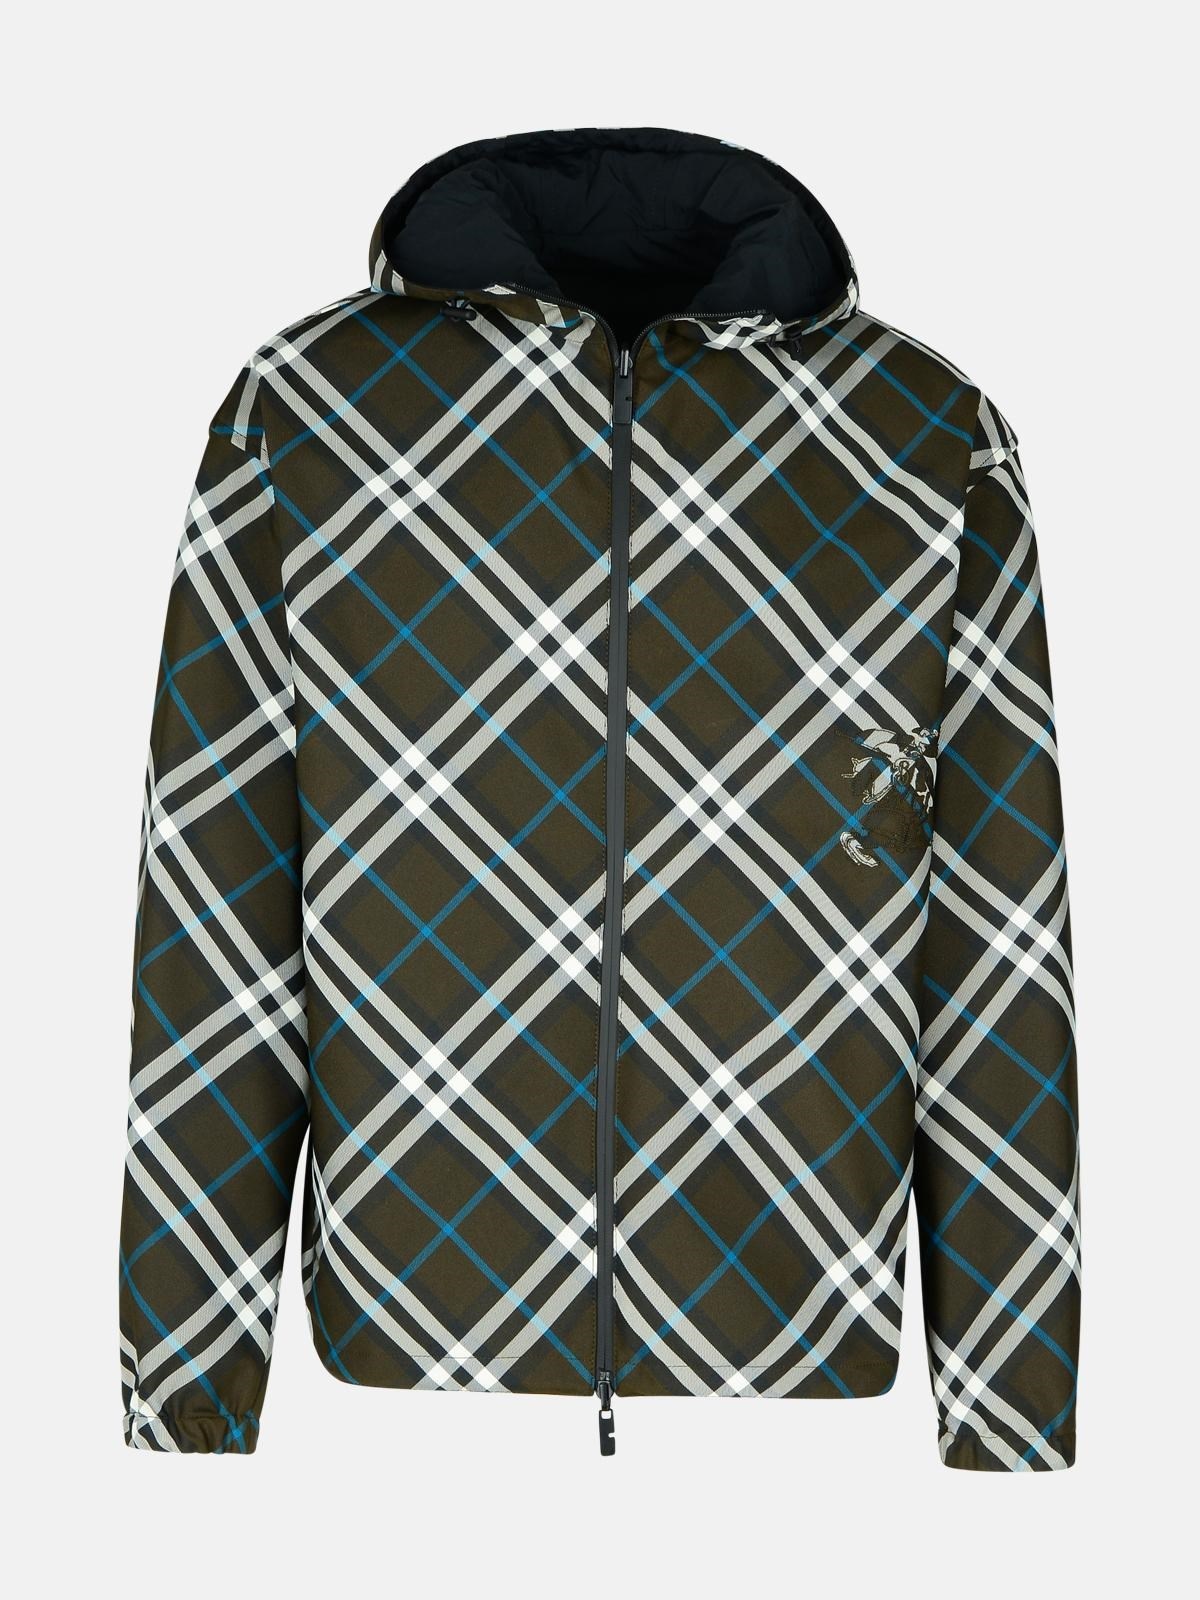 'CHECK' REVERSIBLE GREEN POLYESTER JACKET - 1